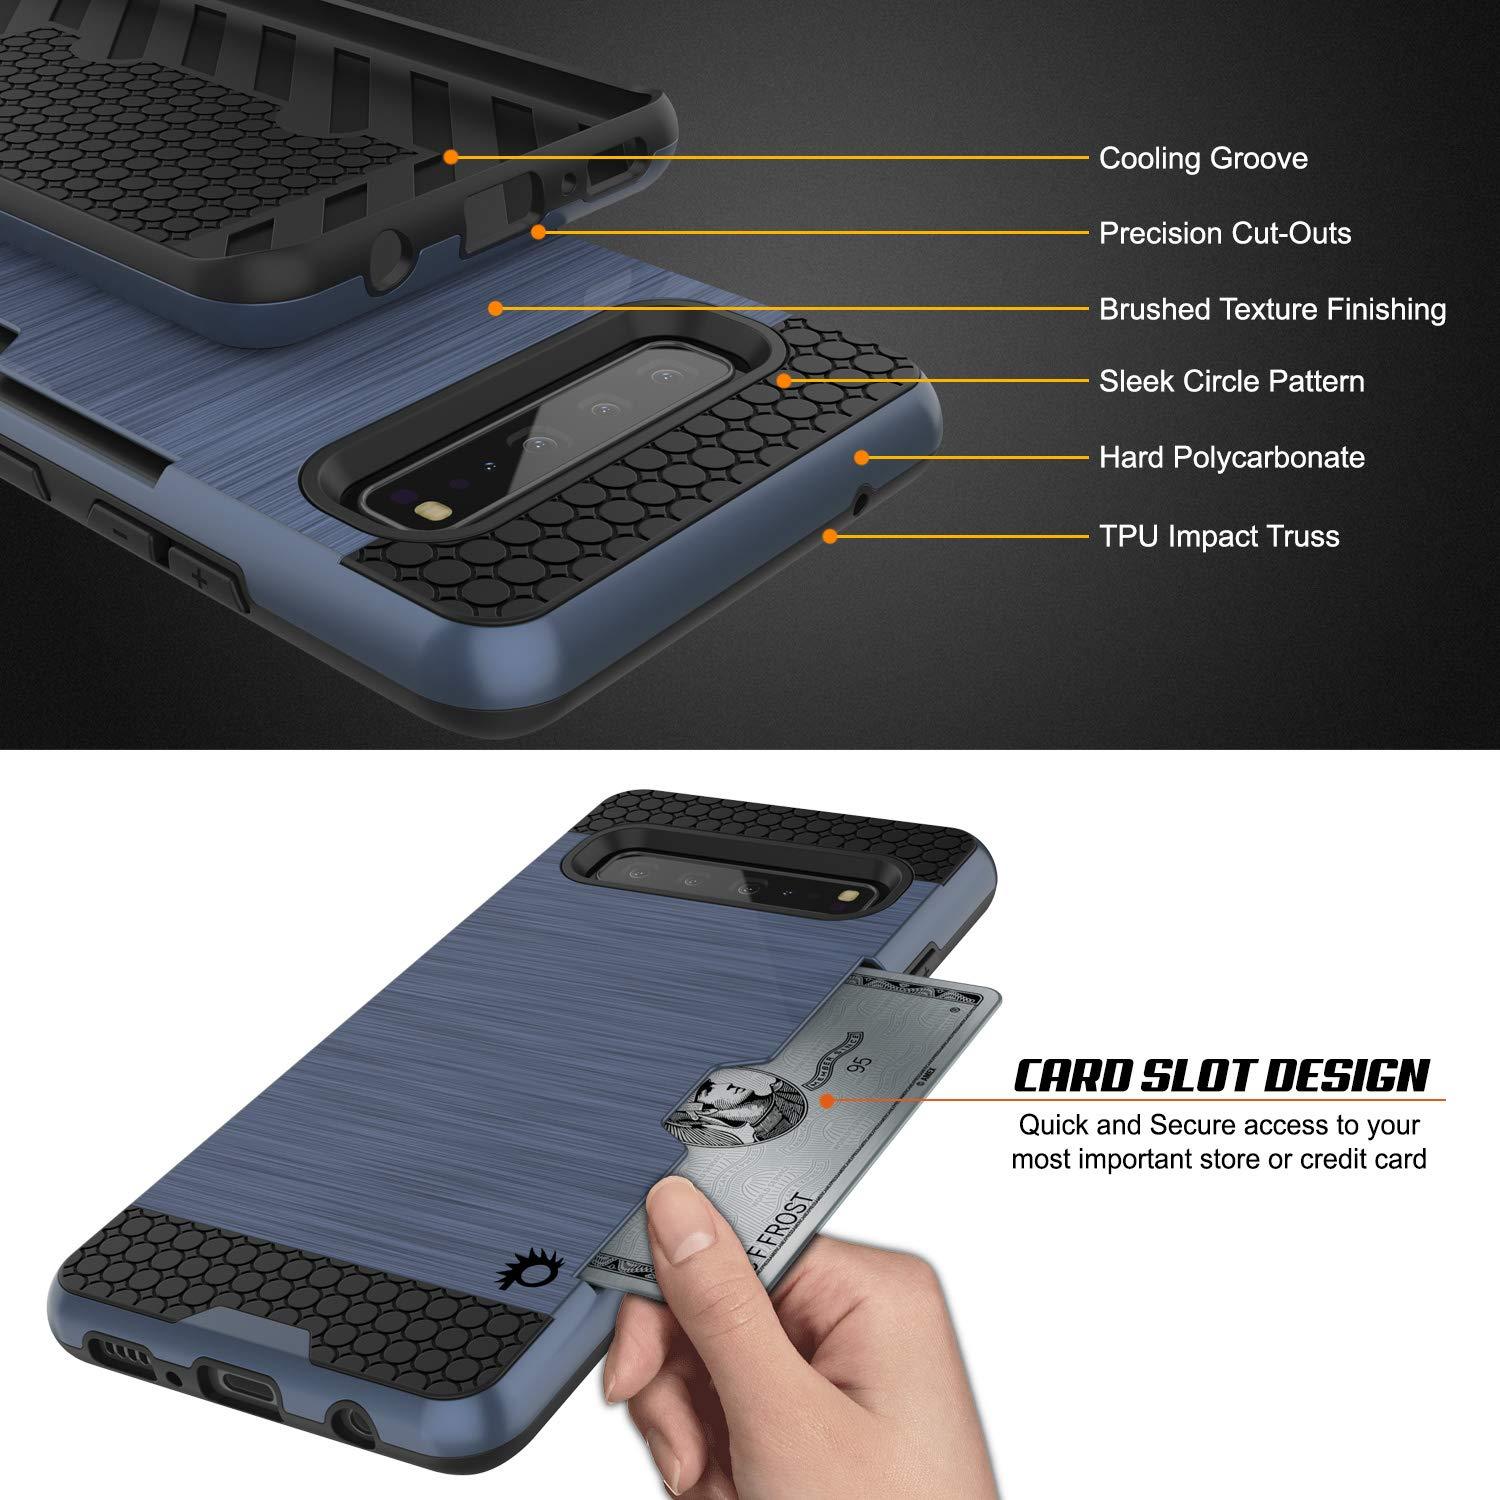 Galaxy S10 5G  Case, PUNKcase [SLOT Series] [Slim Fit] Dual-Layer Armor Cover w/Integrated Anti-Shock System, Credit Card Slot [Navy]